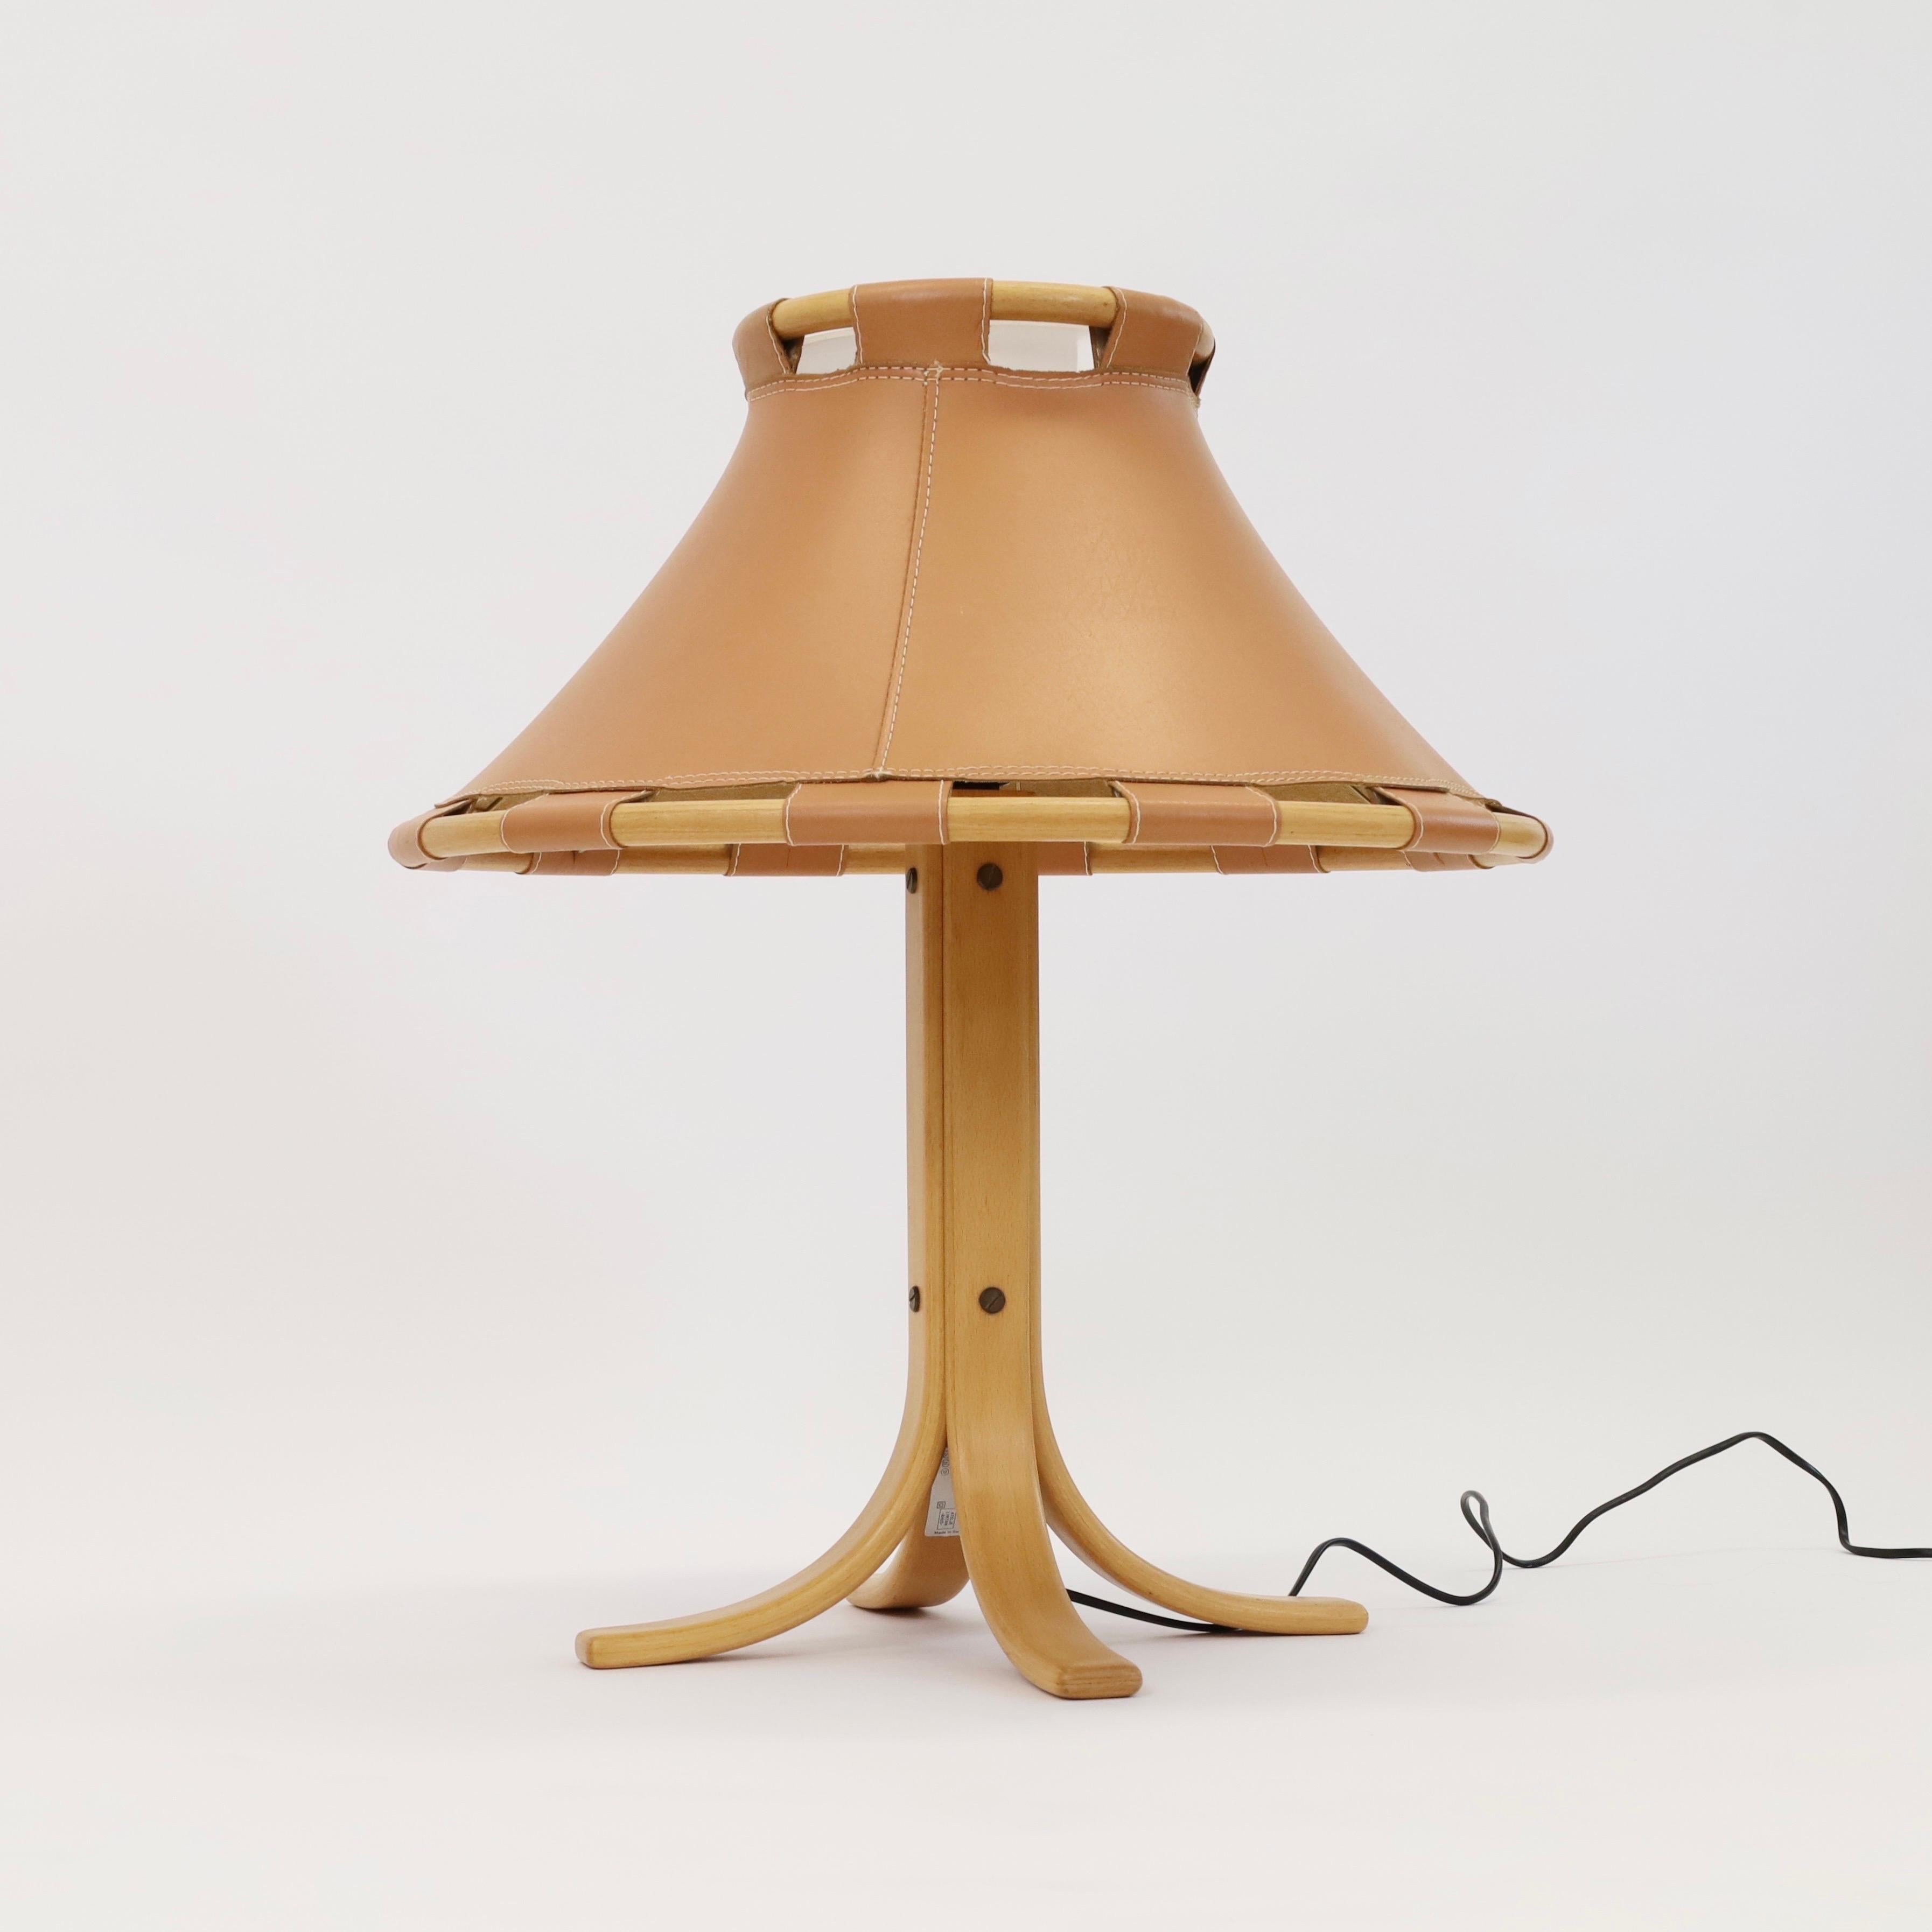 Bentwood Beech wood and leather Desk Lamp by Anna Ehrner for Atelje Lyktan, 1970s, Sweden For Sale